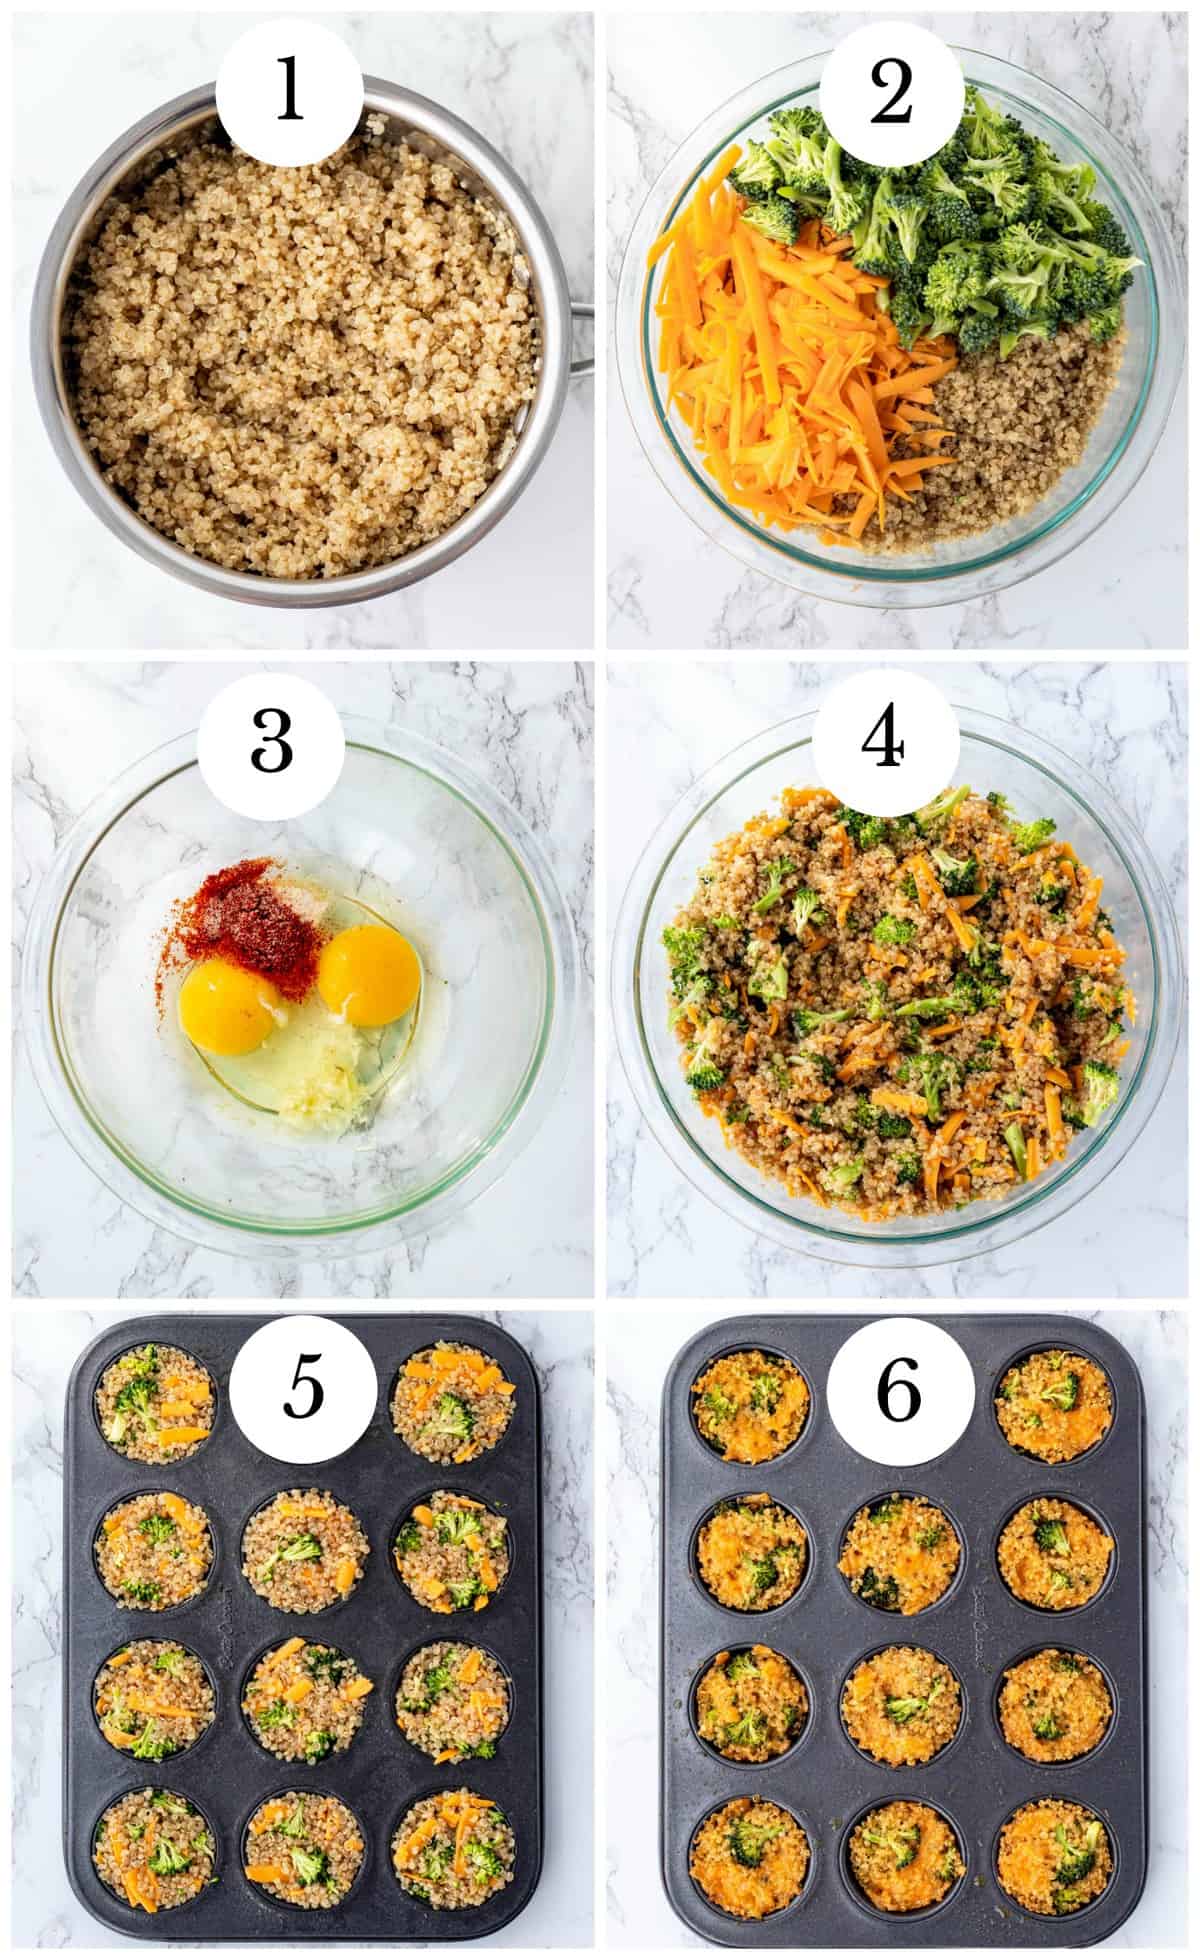 Step by step collage for making broccoli cheddar quinoa bites recipe.